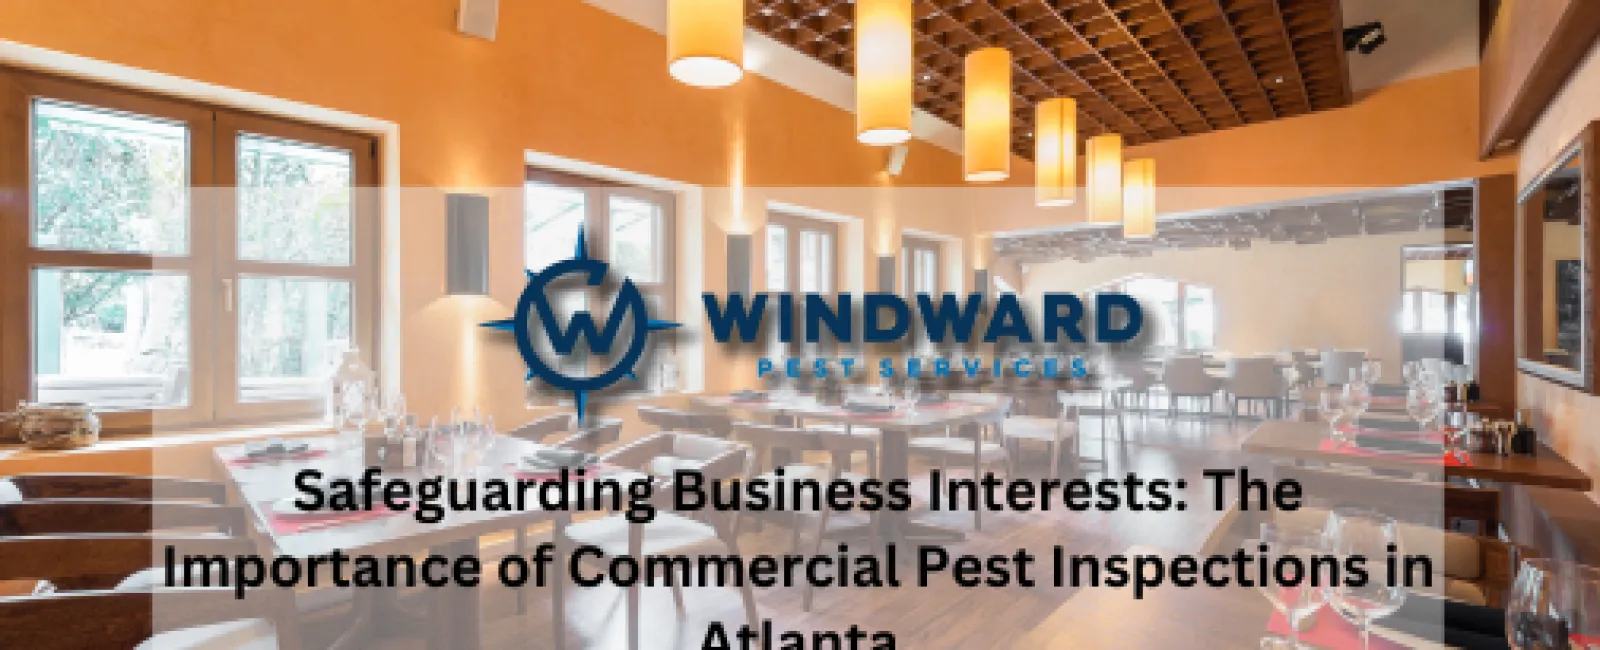 Safeguarding Business Interests The Importance of Commercial Pest Inspections in Atlanta